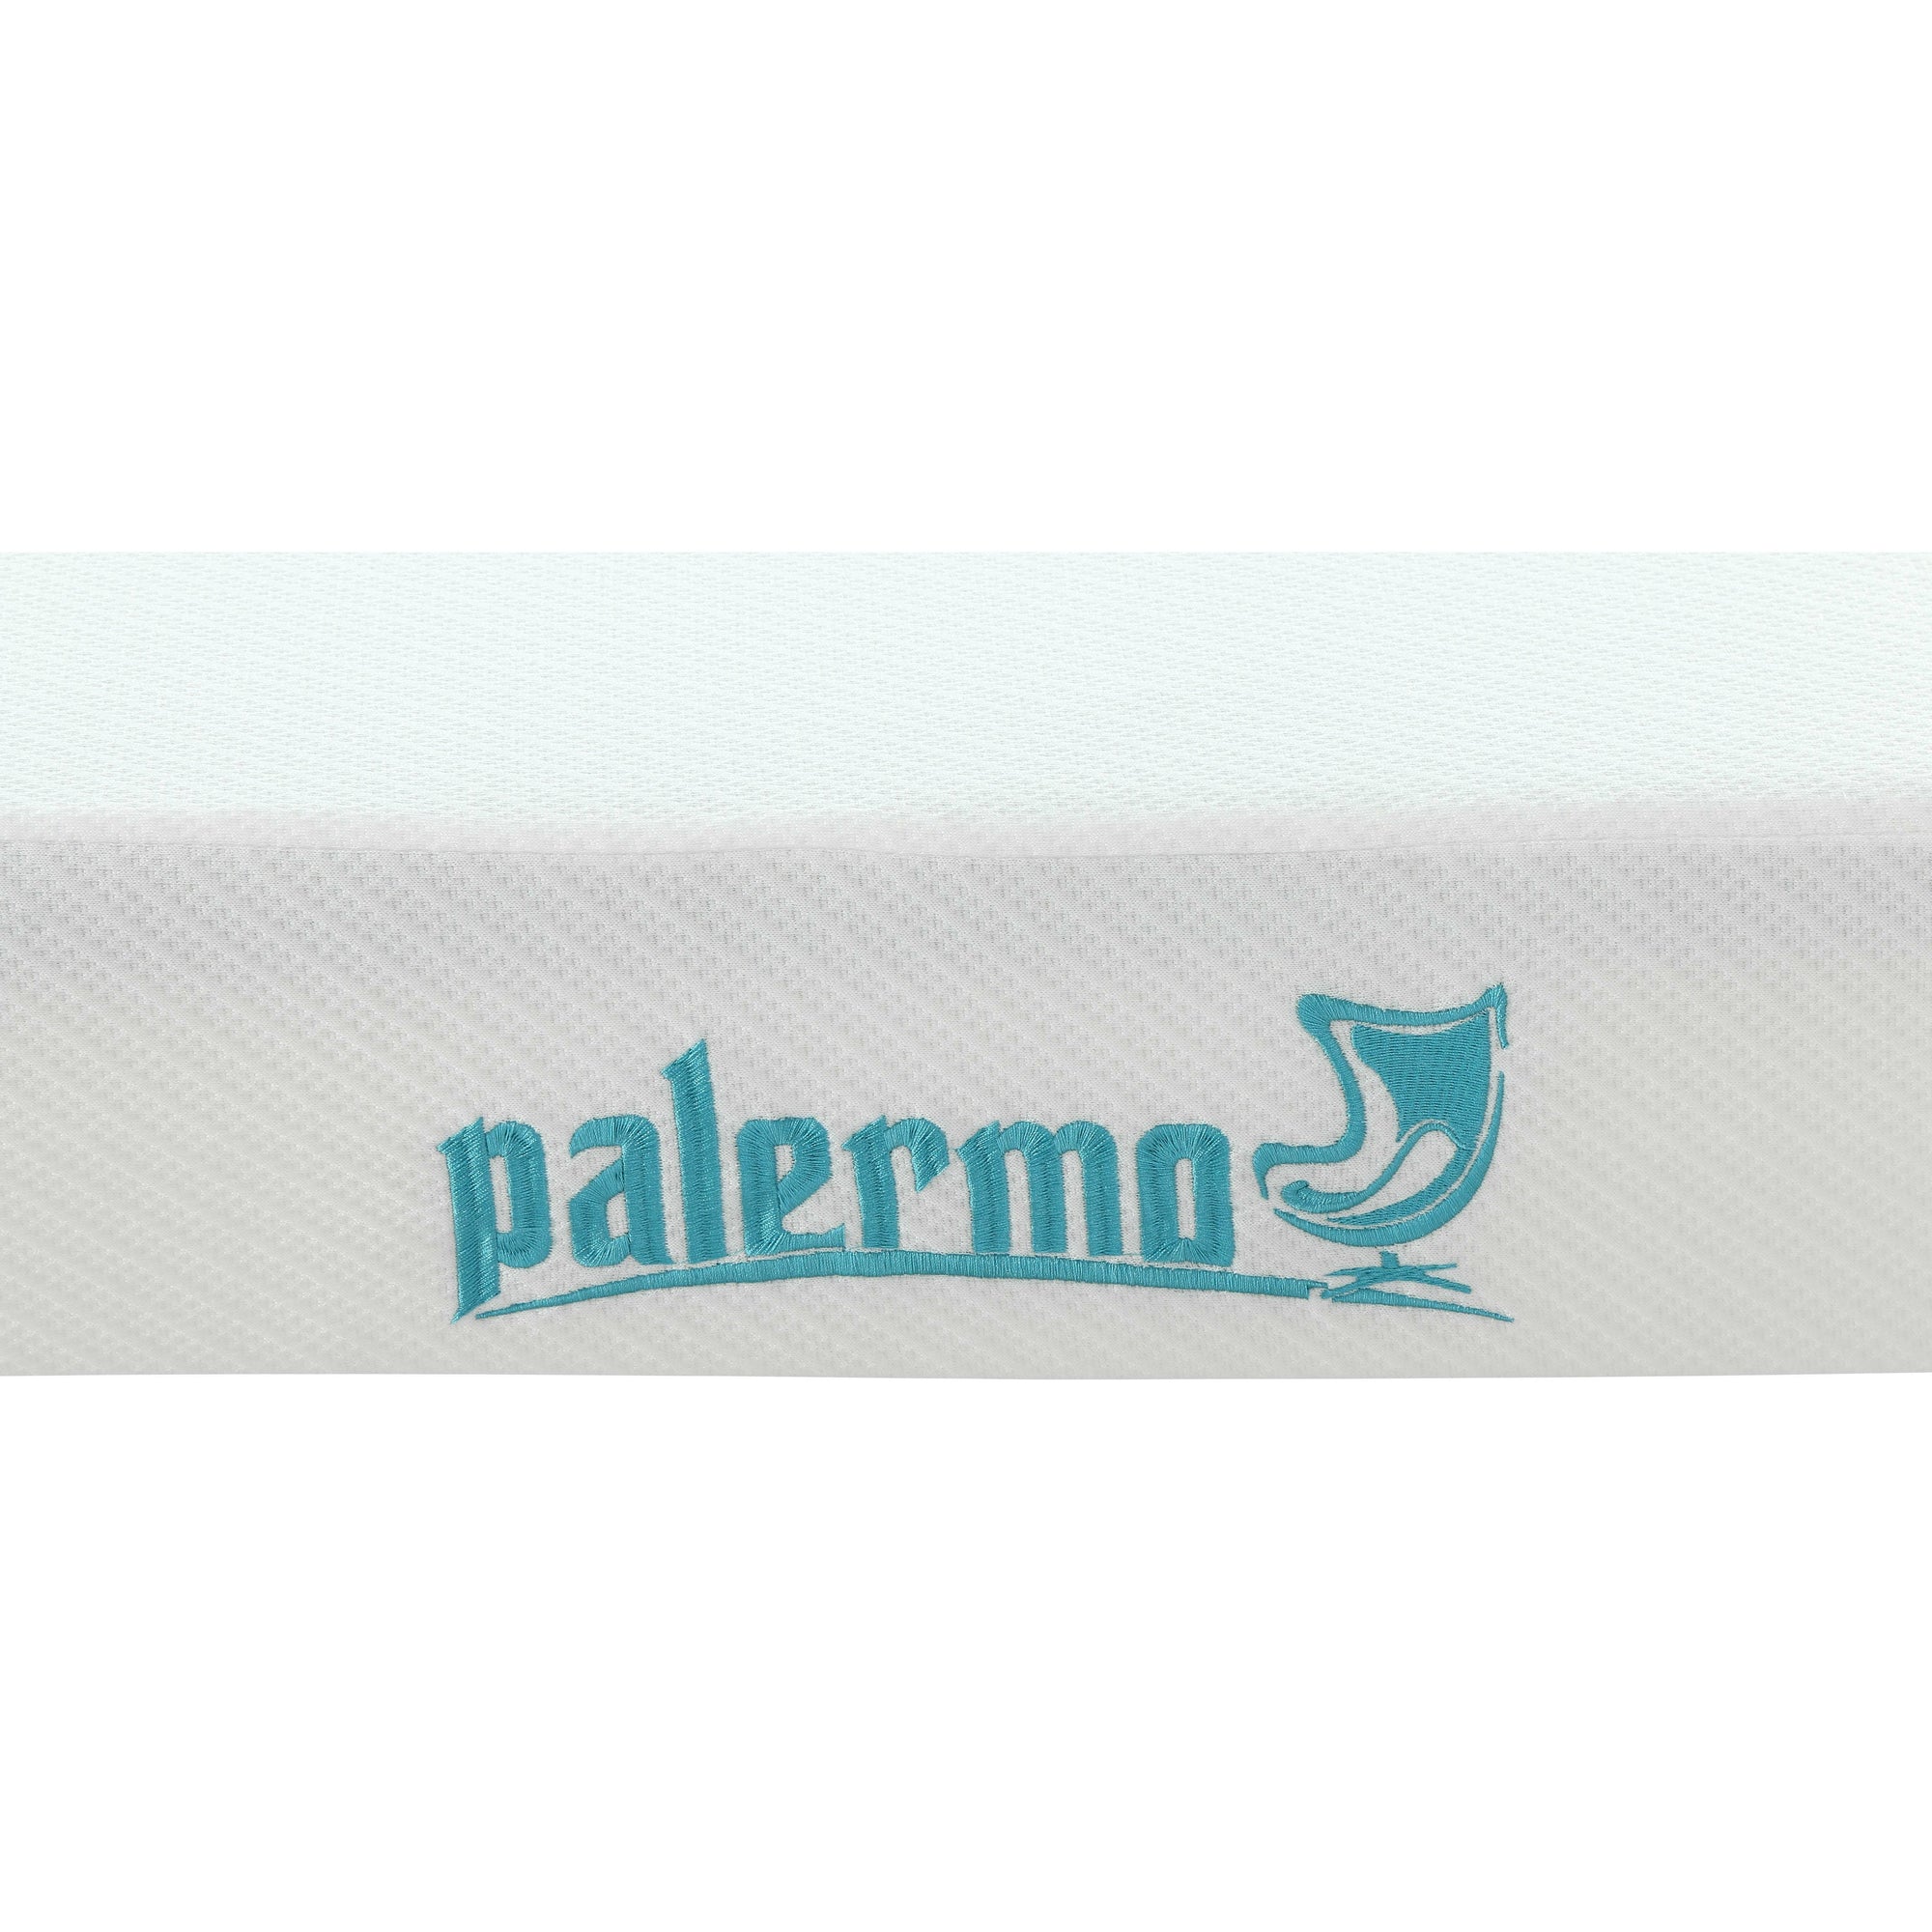 Palermo Single Mattress Memory Foam Green Tea Infused CertiPUR Approved